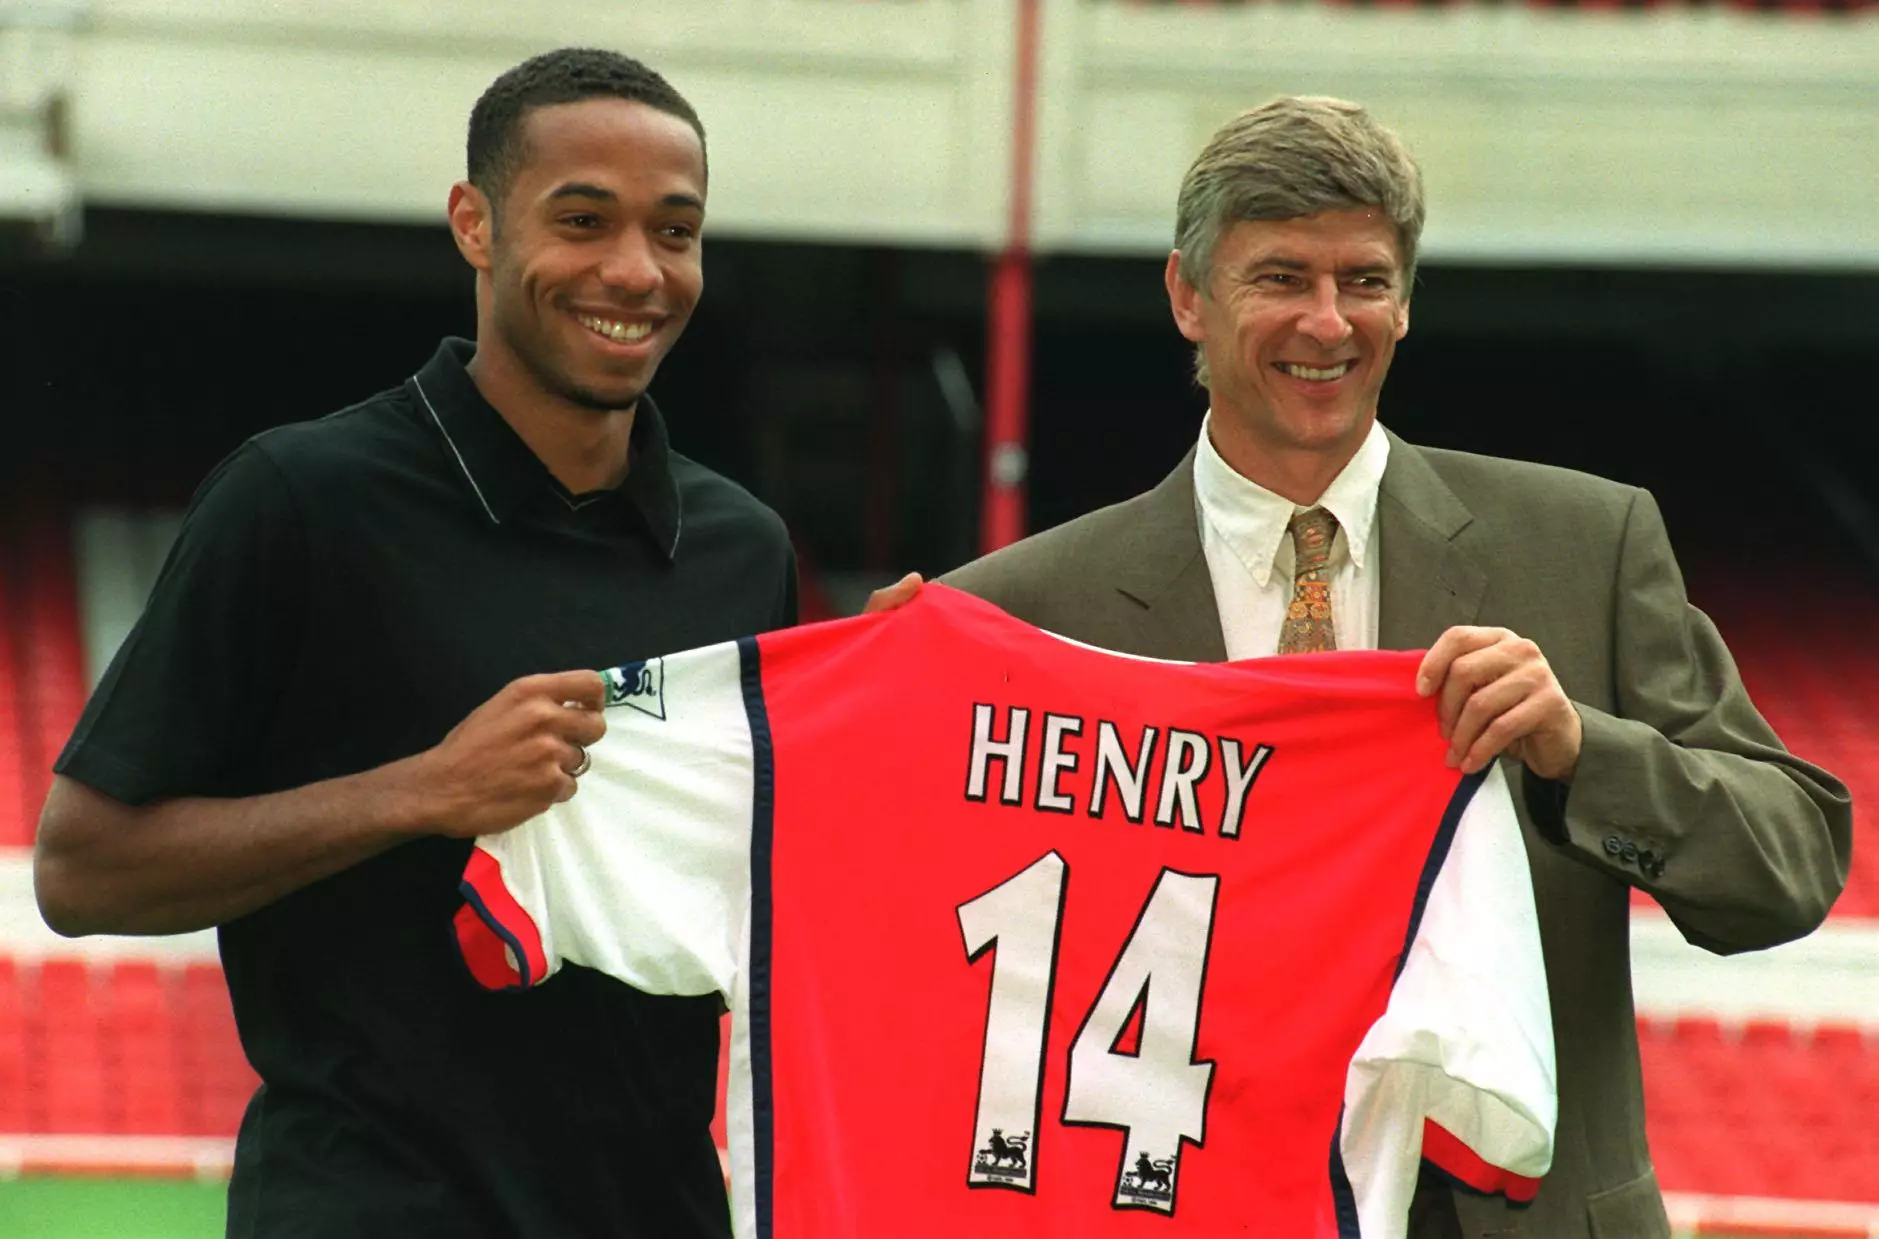 Thierry Henry Arsene Wenger